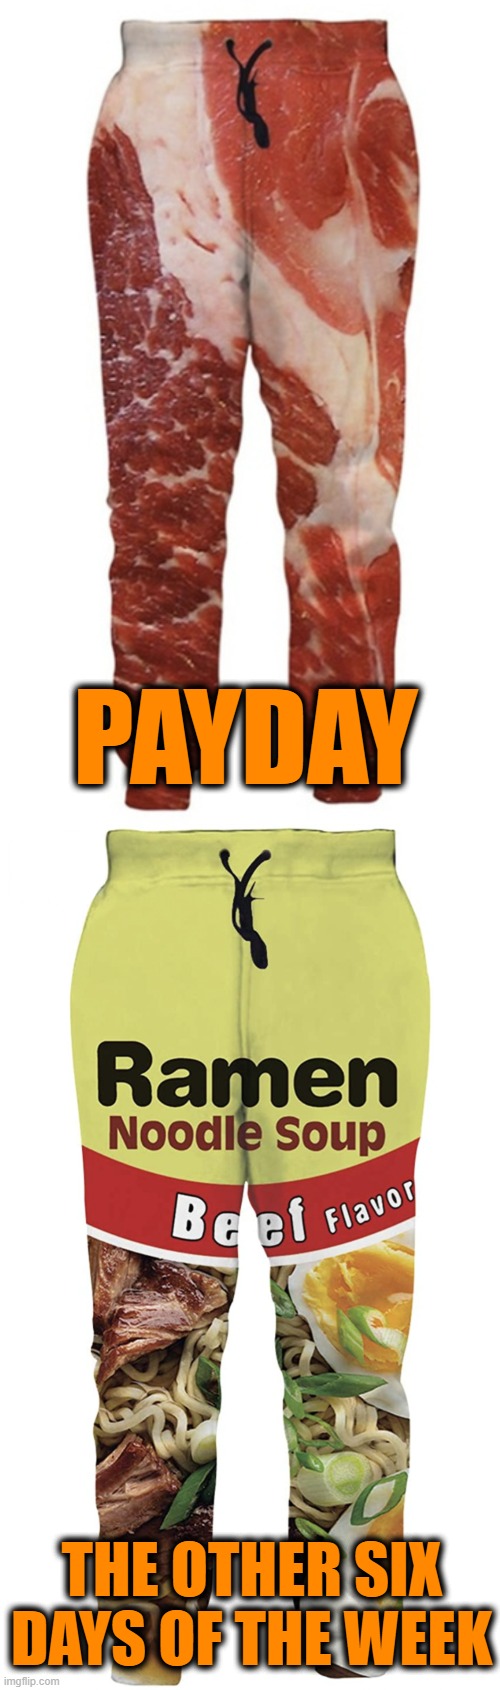 Times is tough! | PAYDAY; THE OTHER SIX DAYS OF THE WEEK | image tagged in memes,lounge pants,steak,payday,ramen,noodles | made w/ Imgflip meme maker